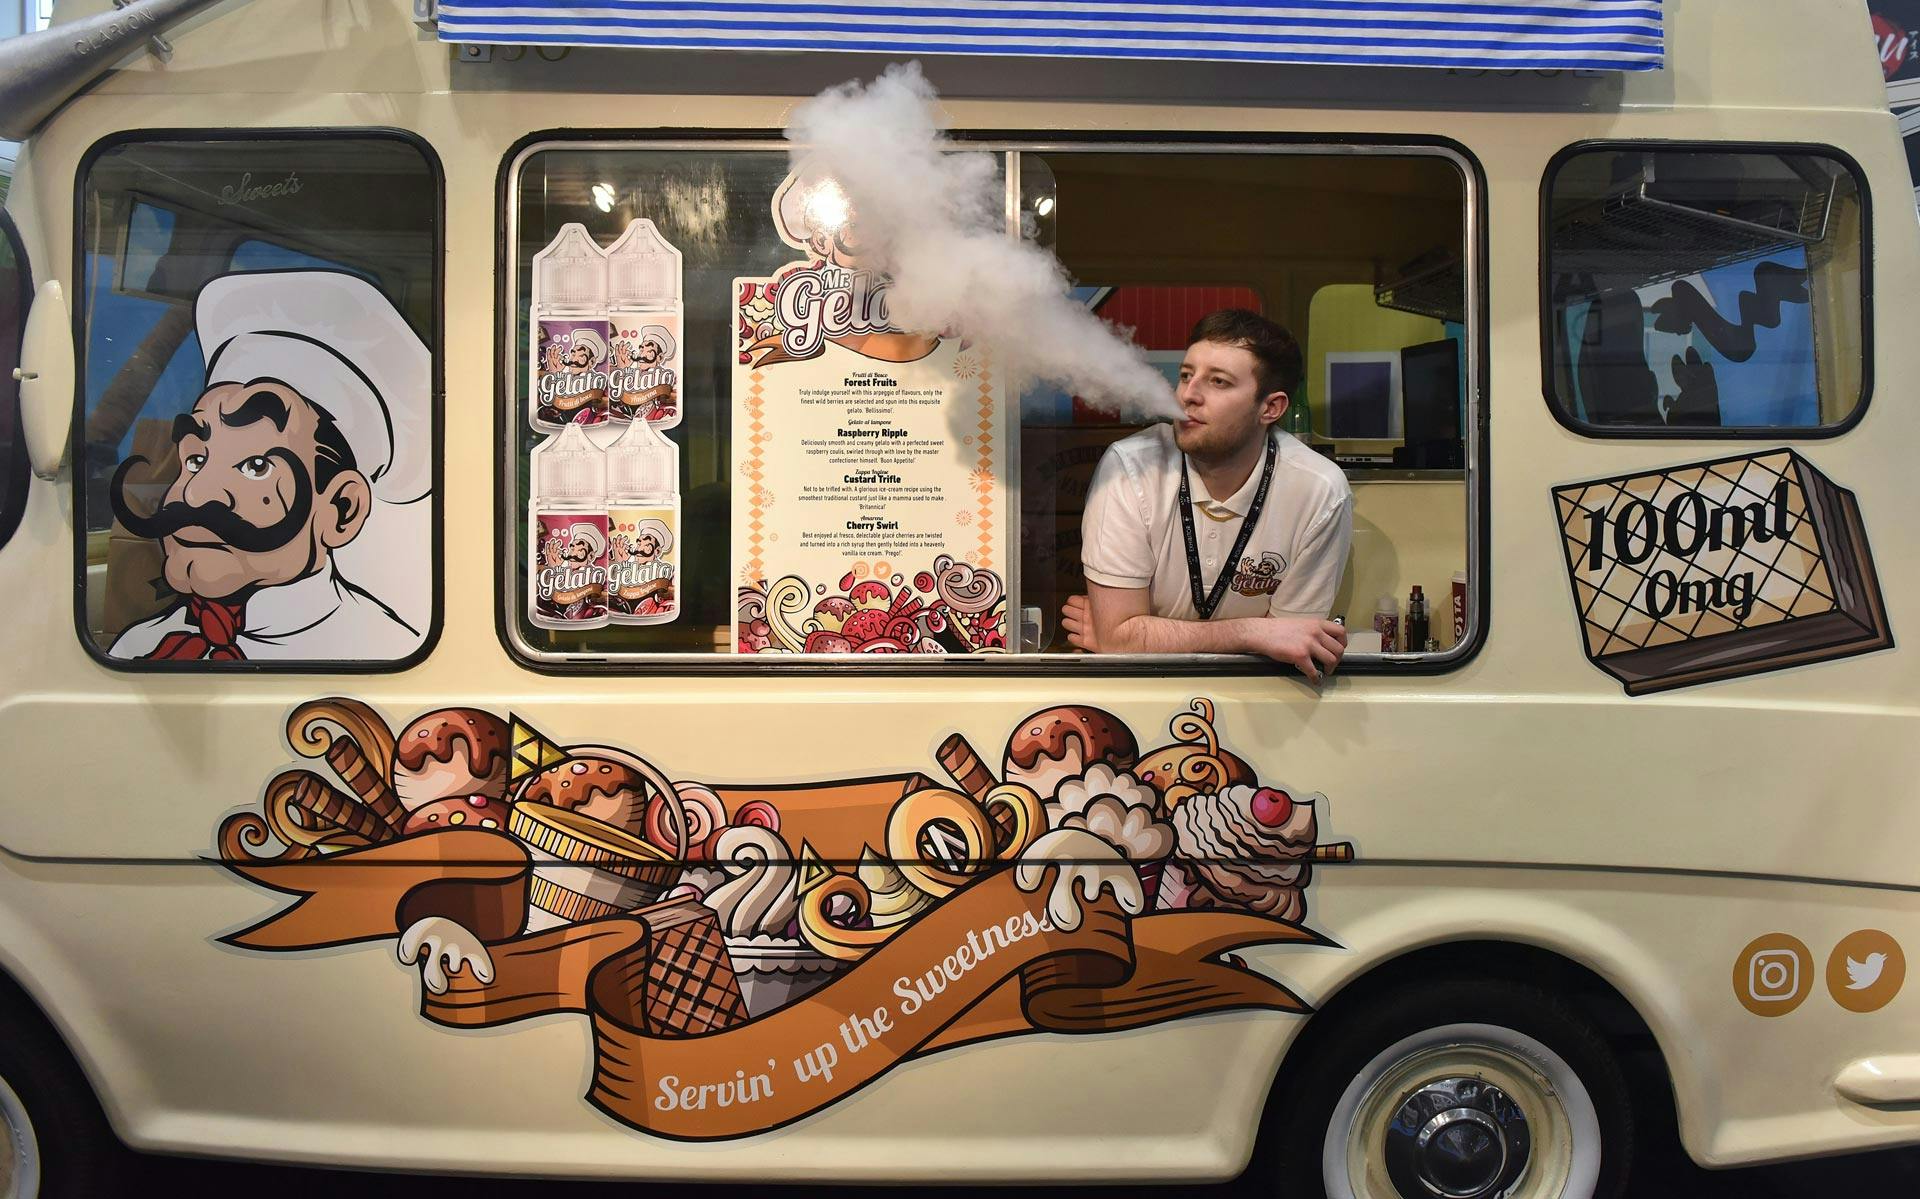 A vendor vapes in a converted ice cream van during the Vape Jam UK 4 in April 2018 in London.